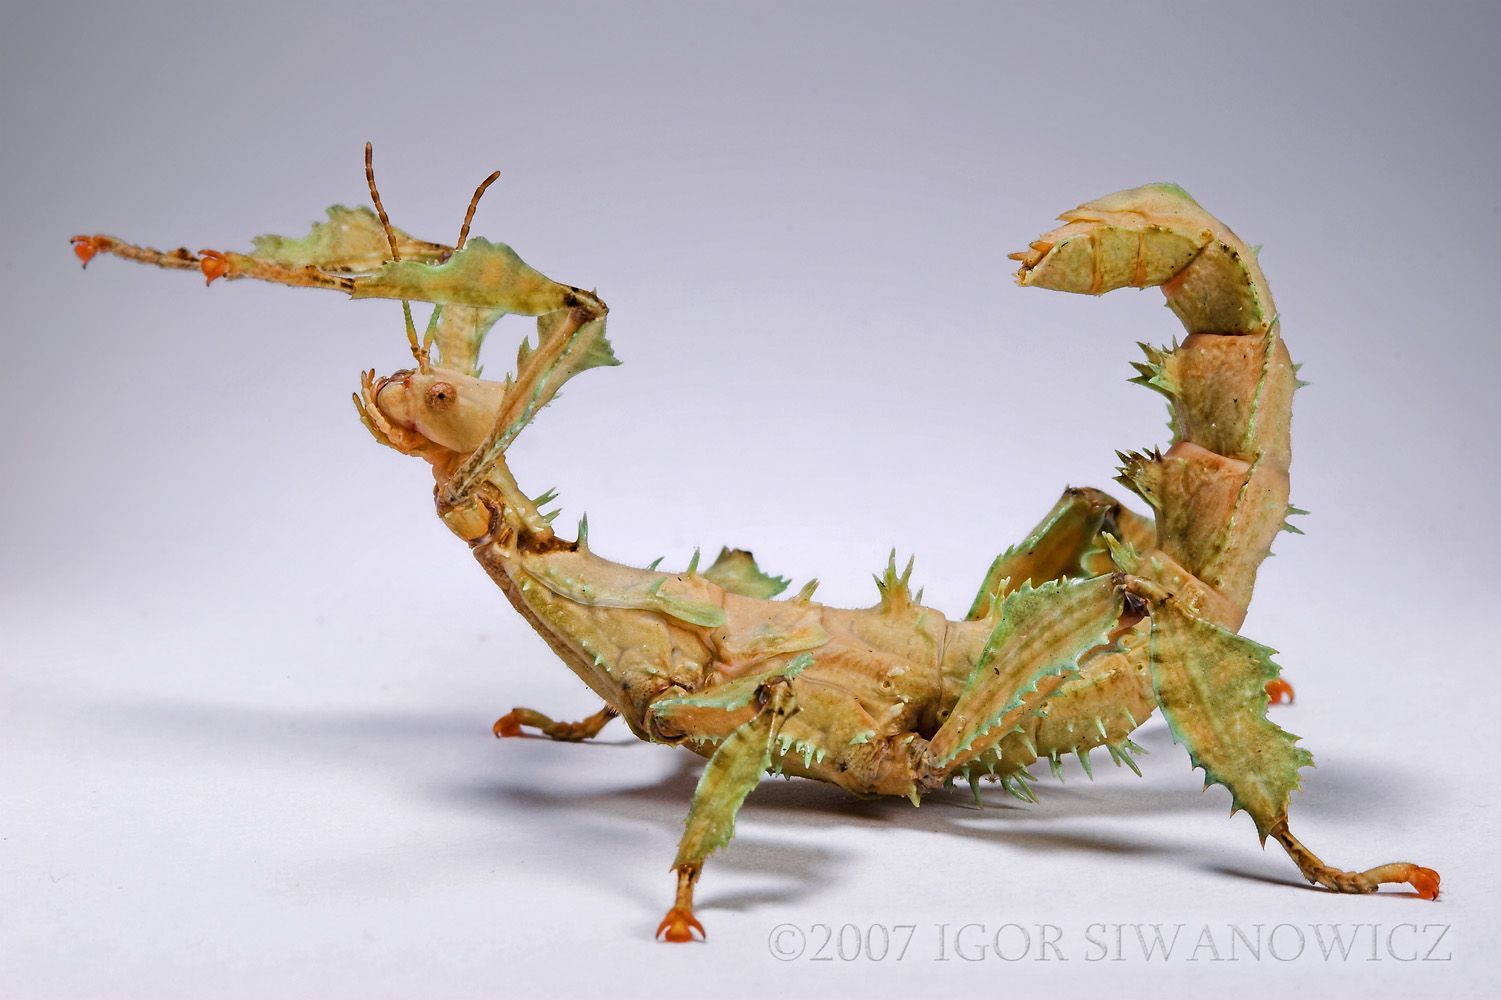 Extatosoma tiaratum: Photo by Photographer Igor Siwanowicz. Stick insect, Cool insects, Insect collection